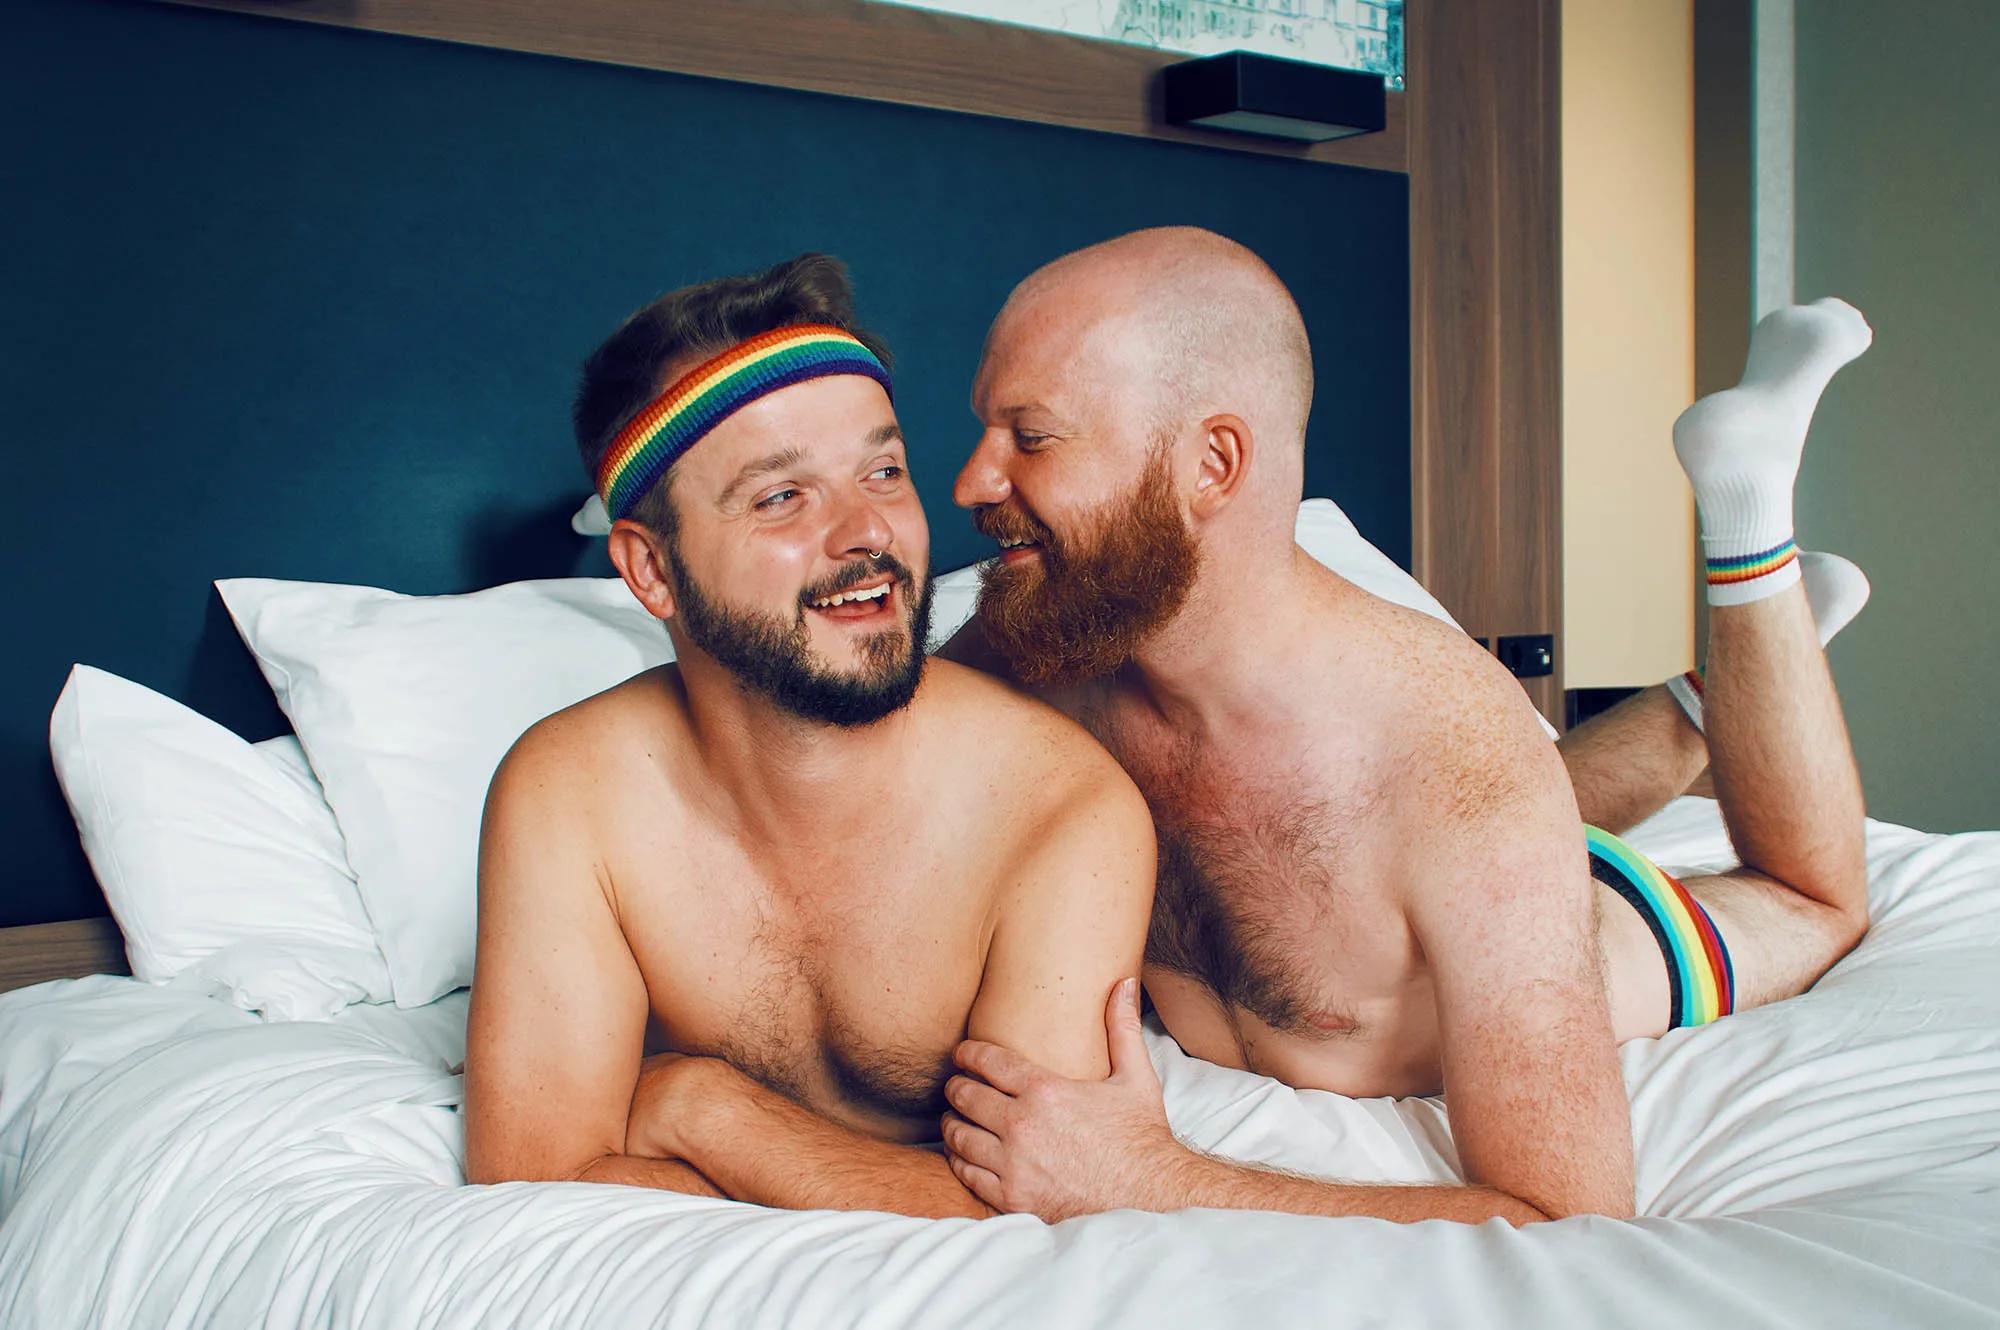 Wearing the rainbow pride gear even in their hotel bed: Gay Couple Travel Blogger laying arm-in-arm in the gay-friendly design Hotel Aloft in Munich, Germany © Coupleofmen.com